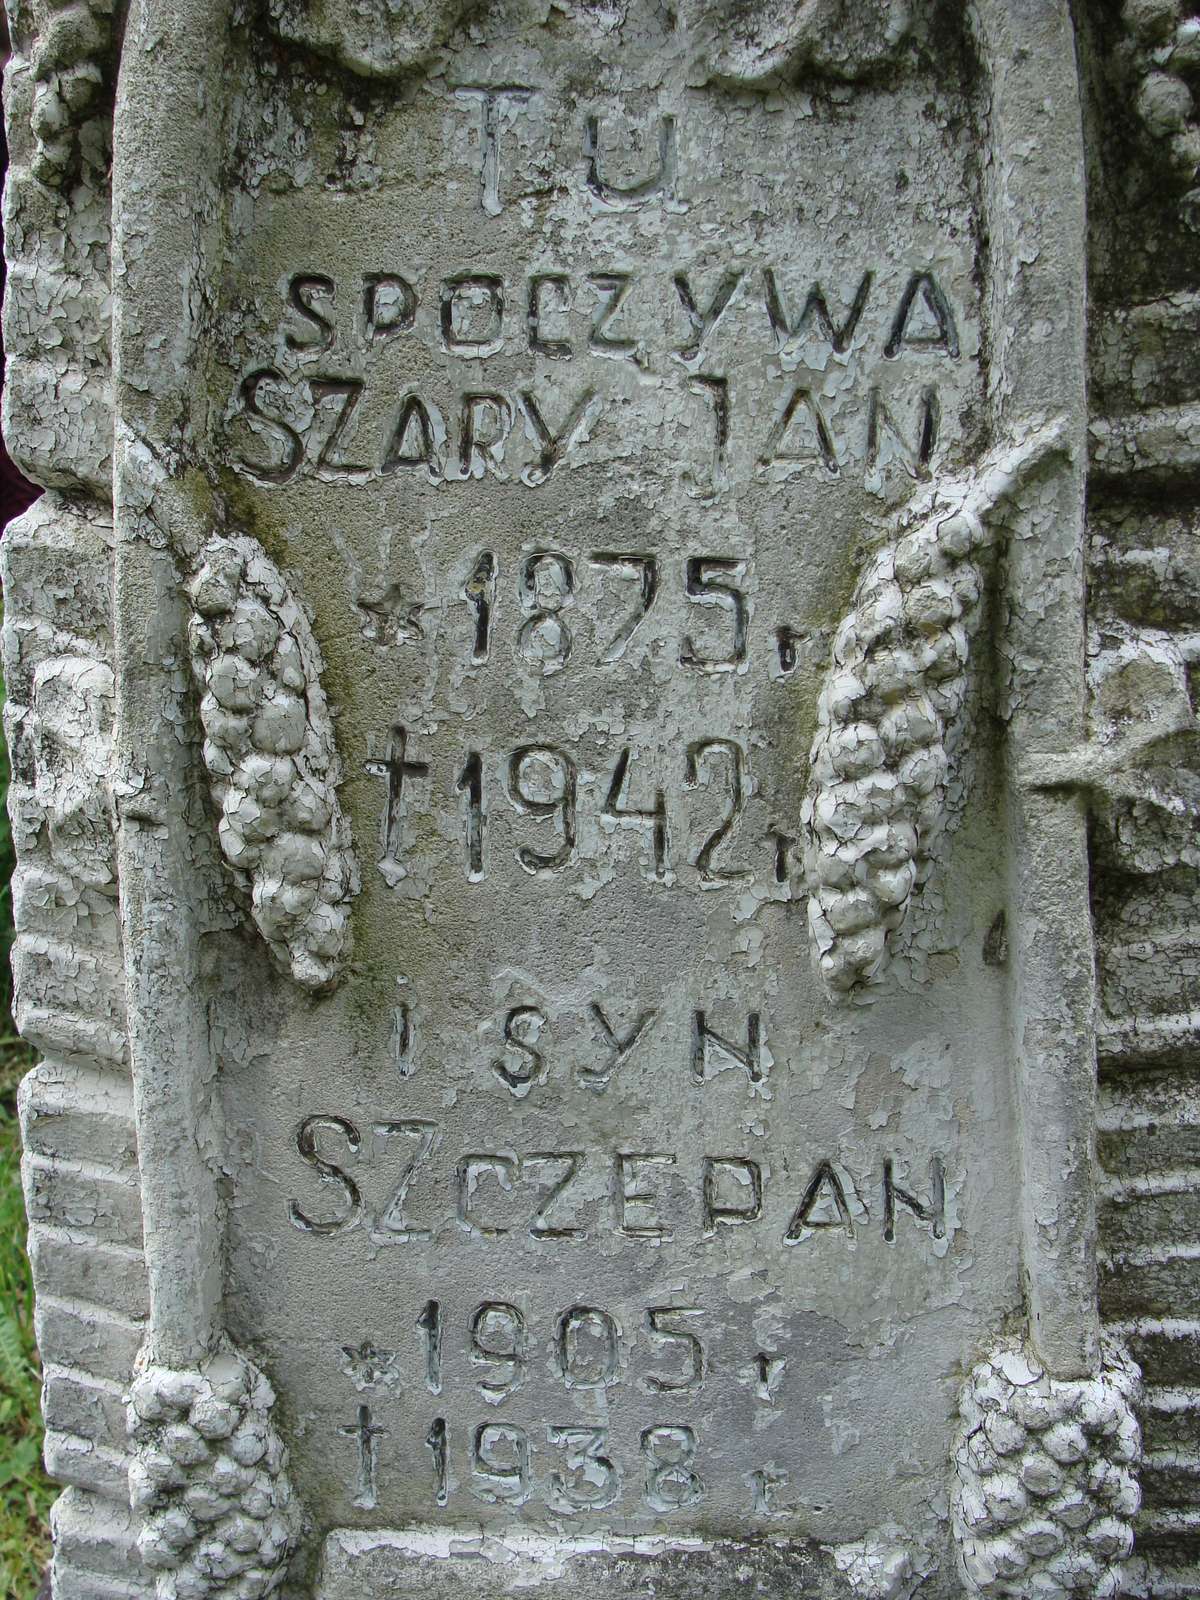 Inscription from the gravestone of Jan and Szczepan Szary. Cemetery in Kokutkowce